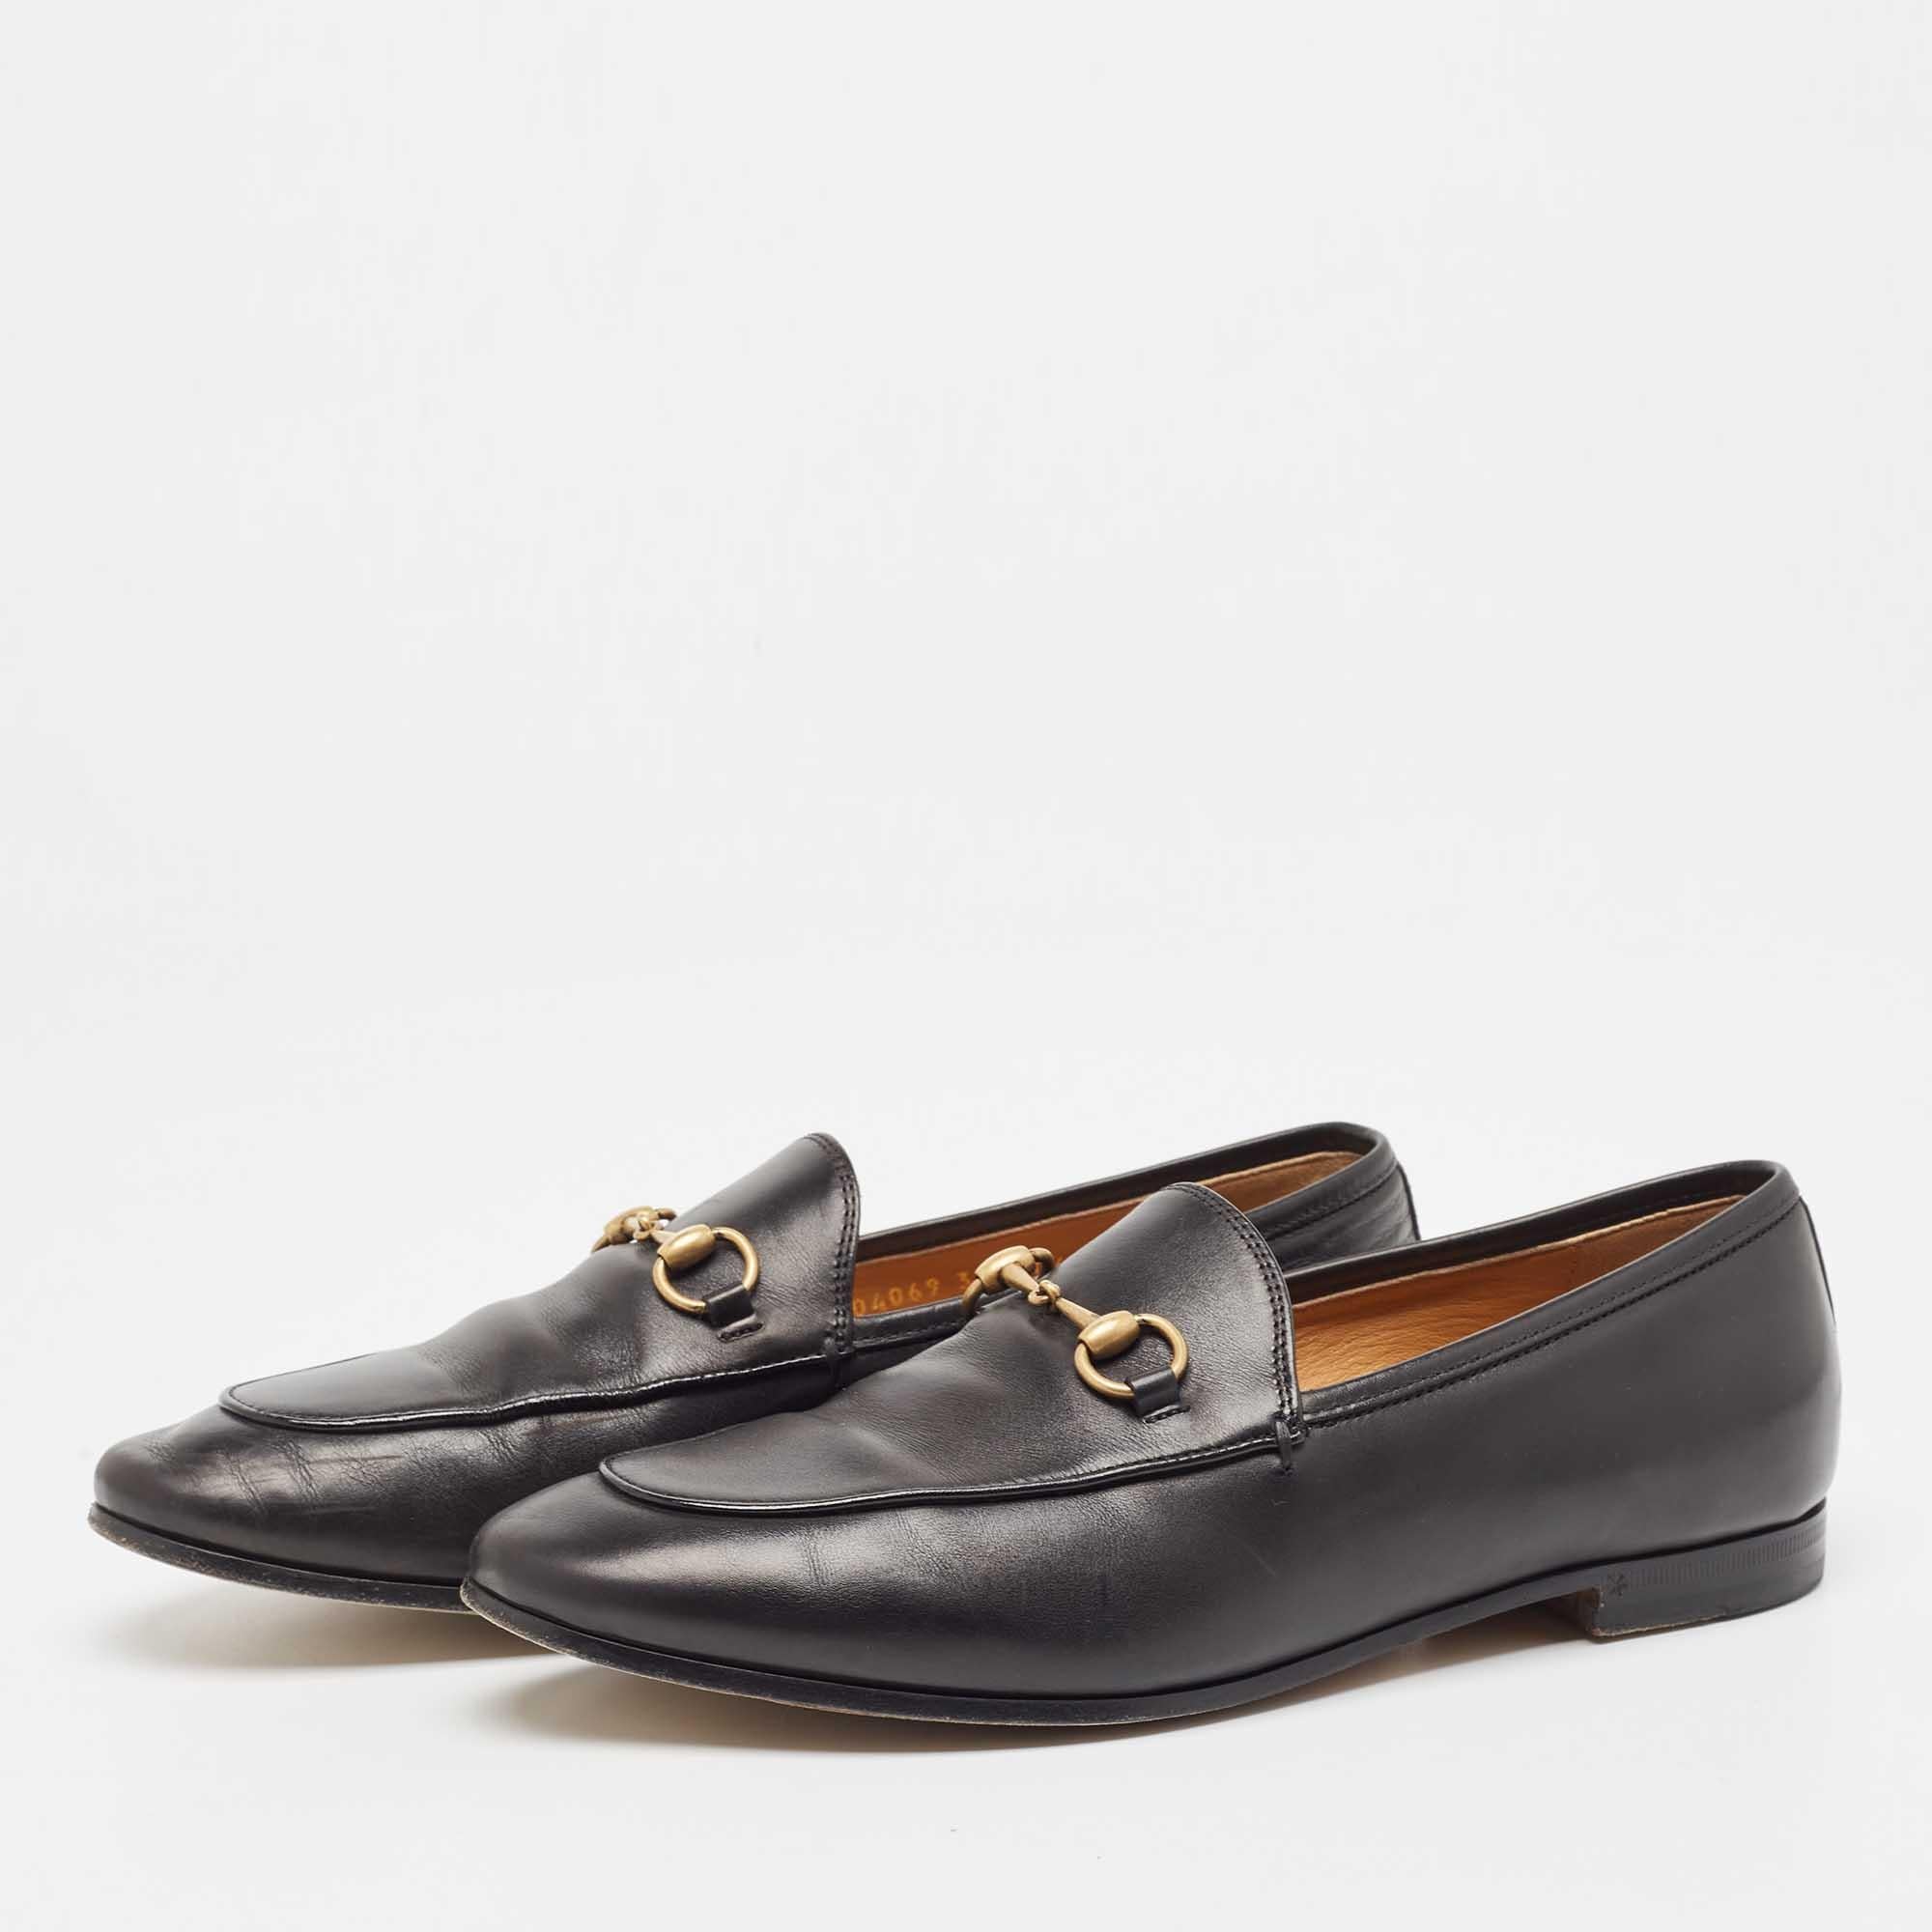 Give your outfit a luxe update with this pair of Gucci black loafers. The shoes are sewn perfectly to help you make a statement in them for a long time.

